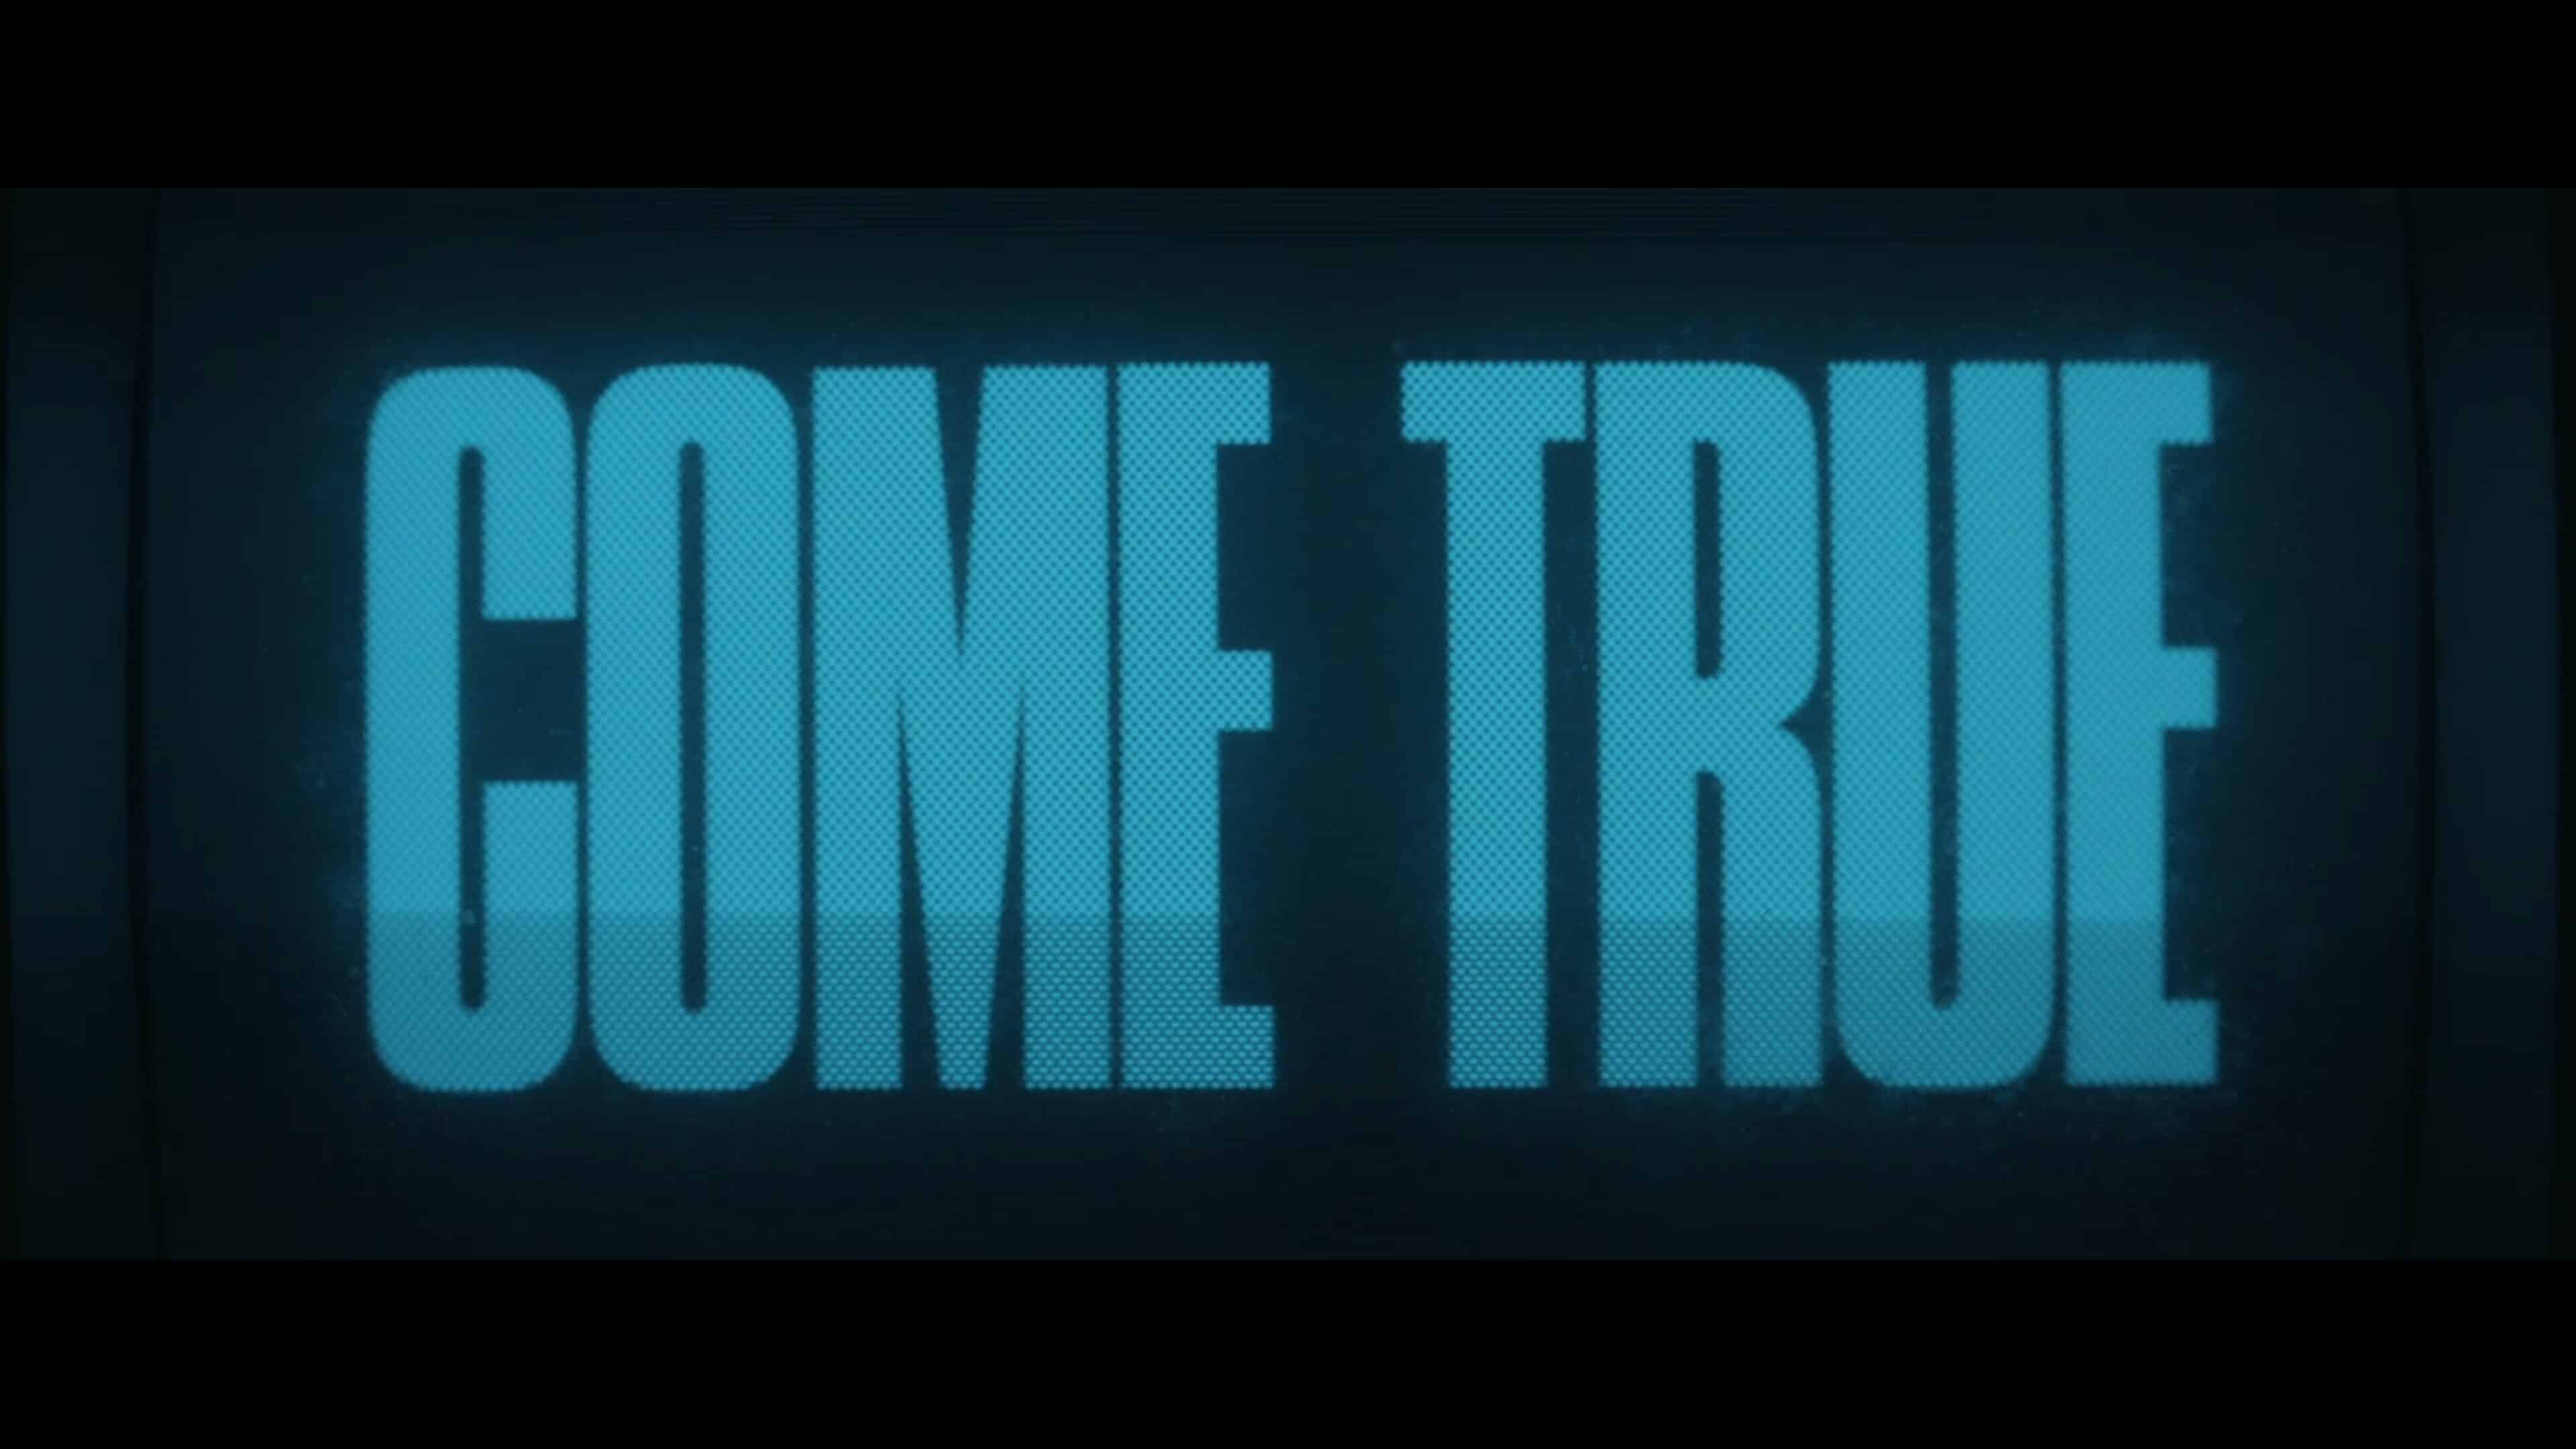 An alternate title card for the movie Come True